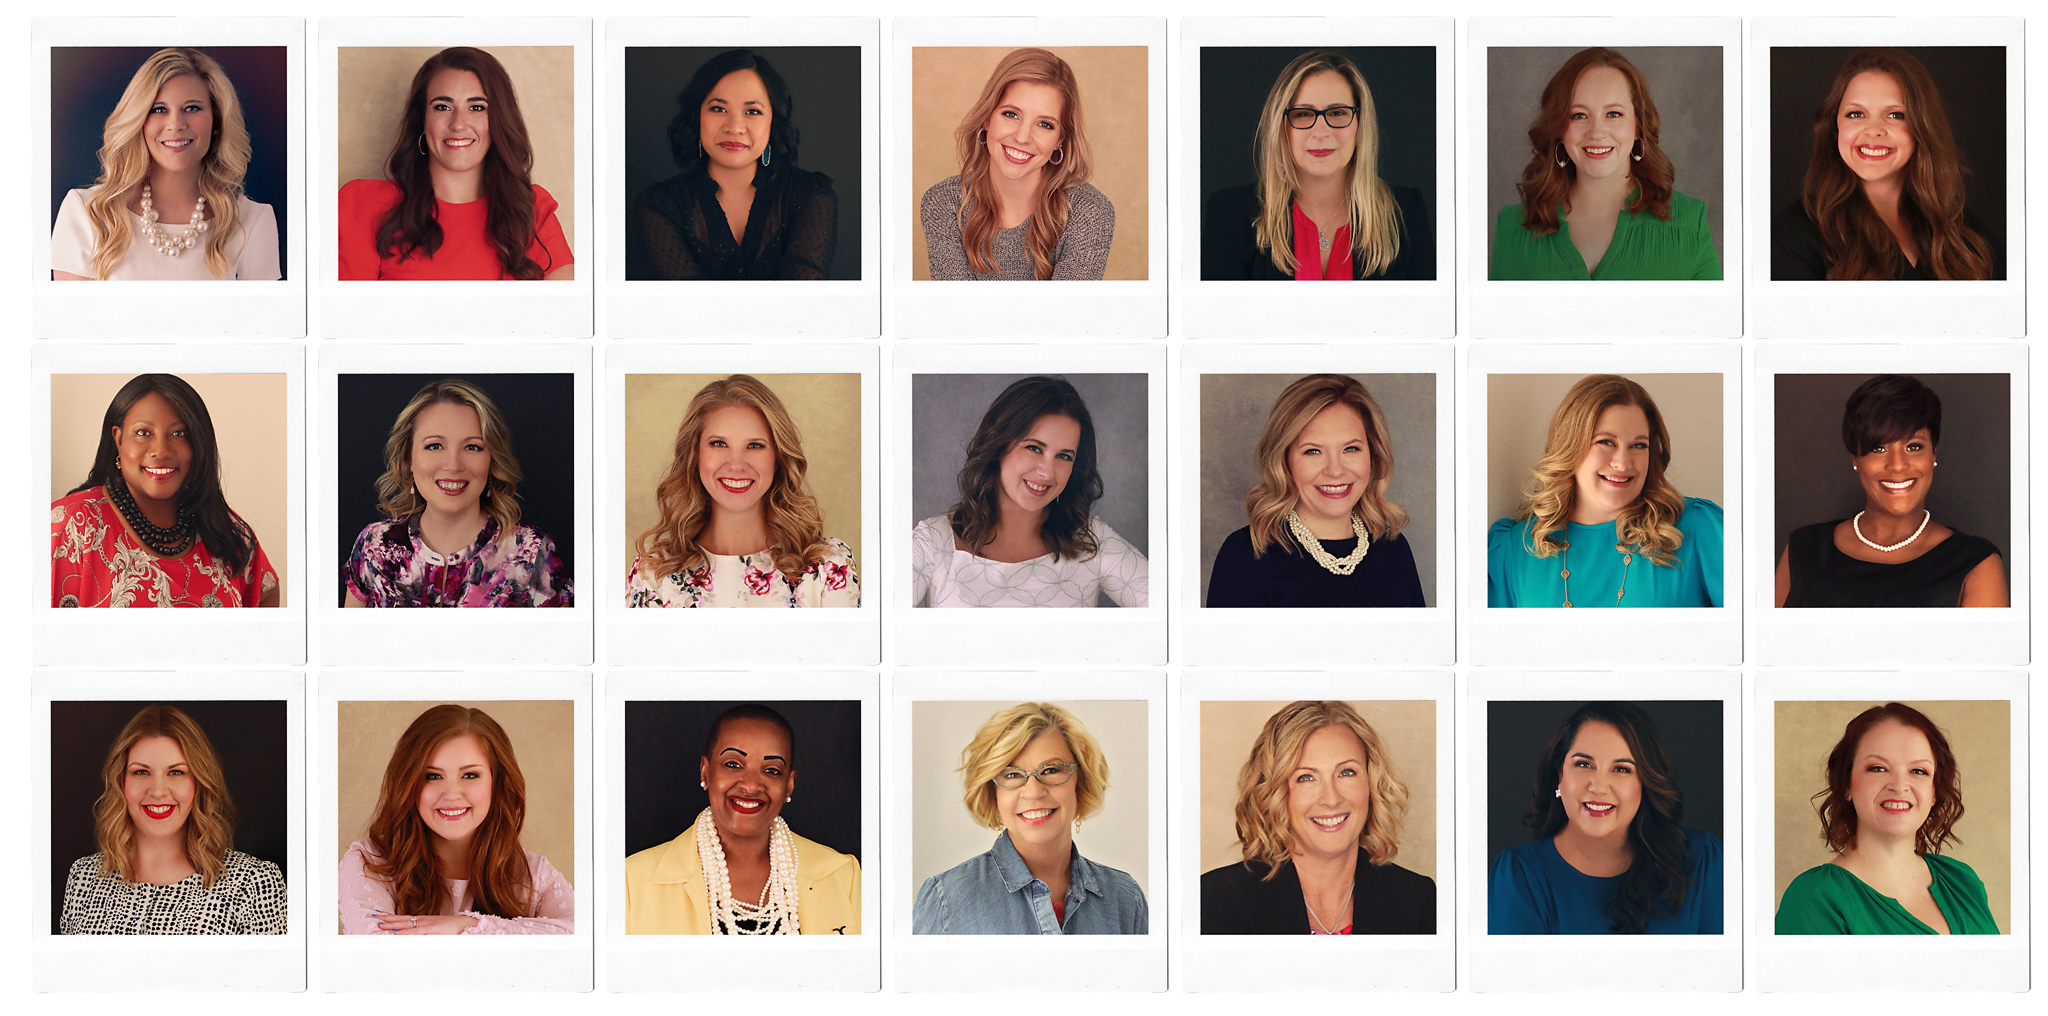 Grid featuring polaroids of women leaders ranging from business casual to business attire. They women are smiling and look professional. Members of the Junior League of Collin County, a nonprofit in Plano Texas.